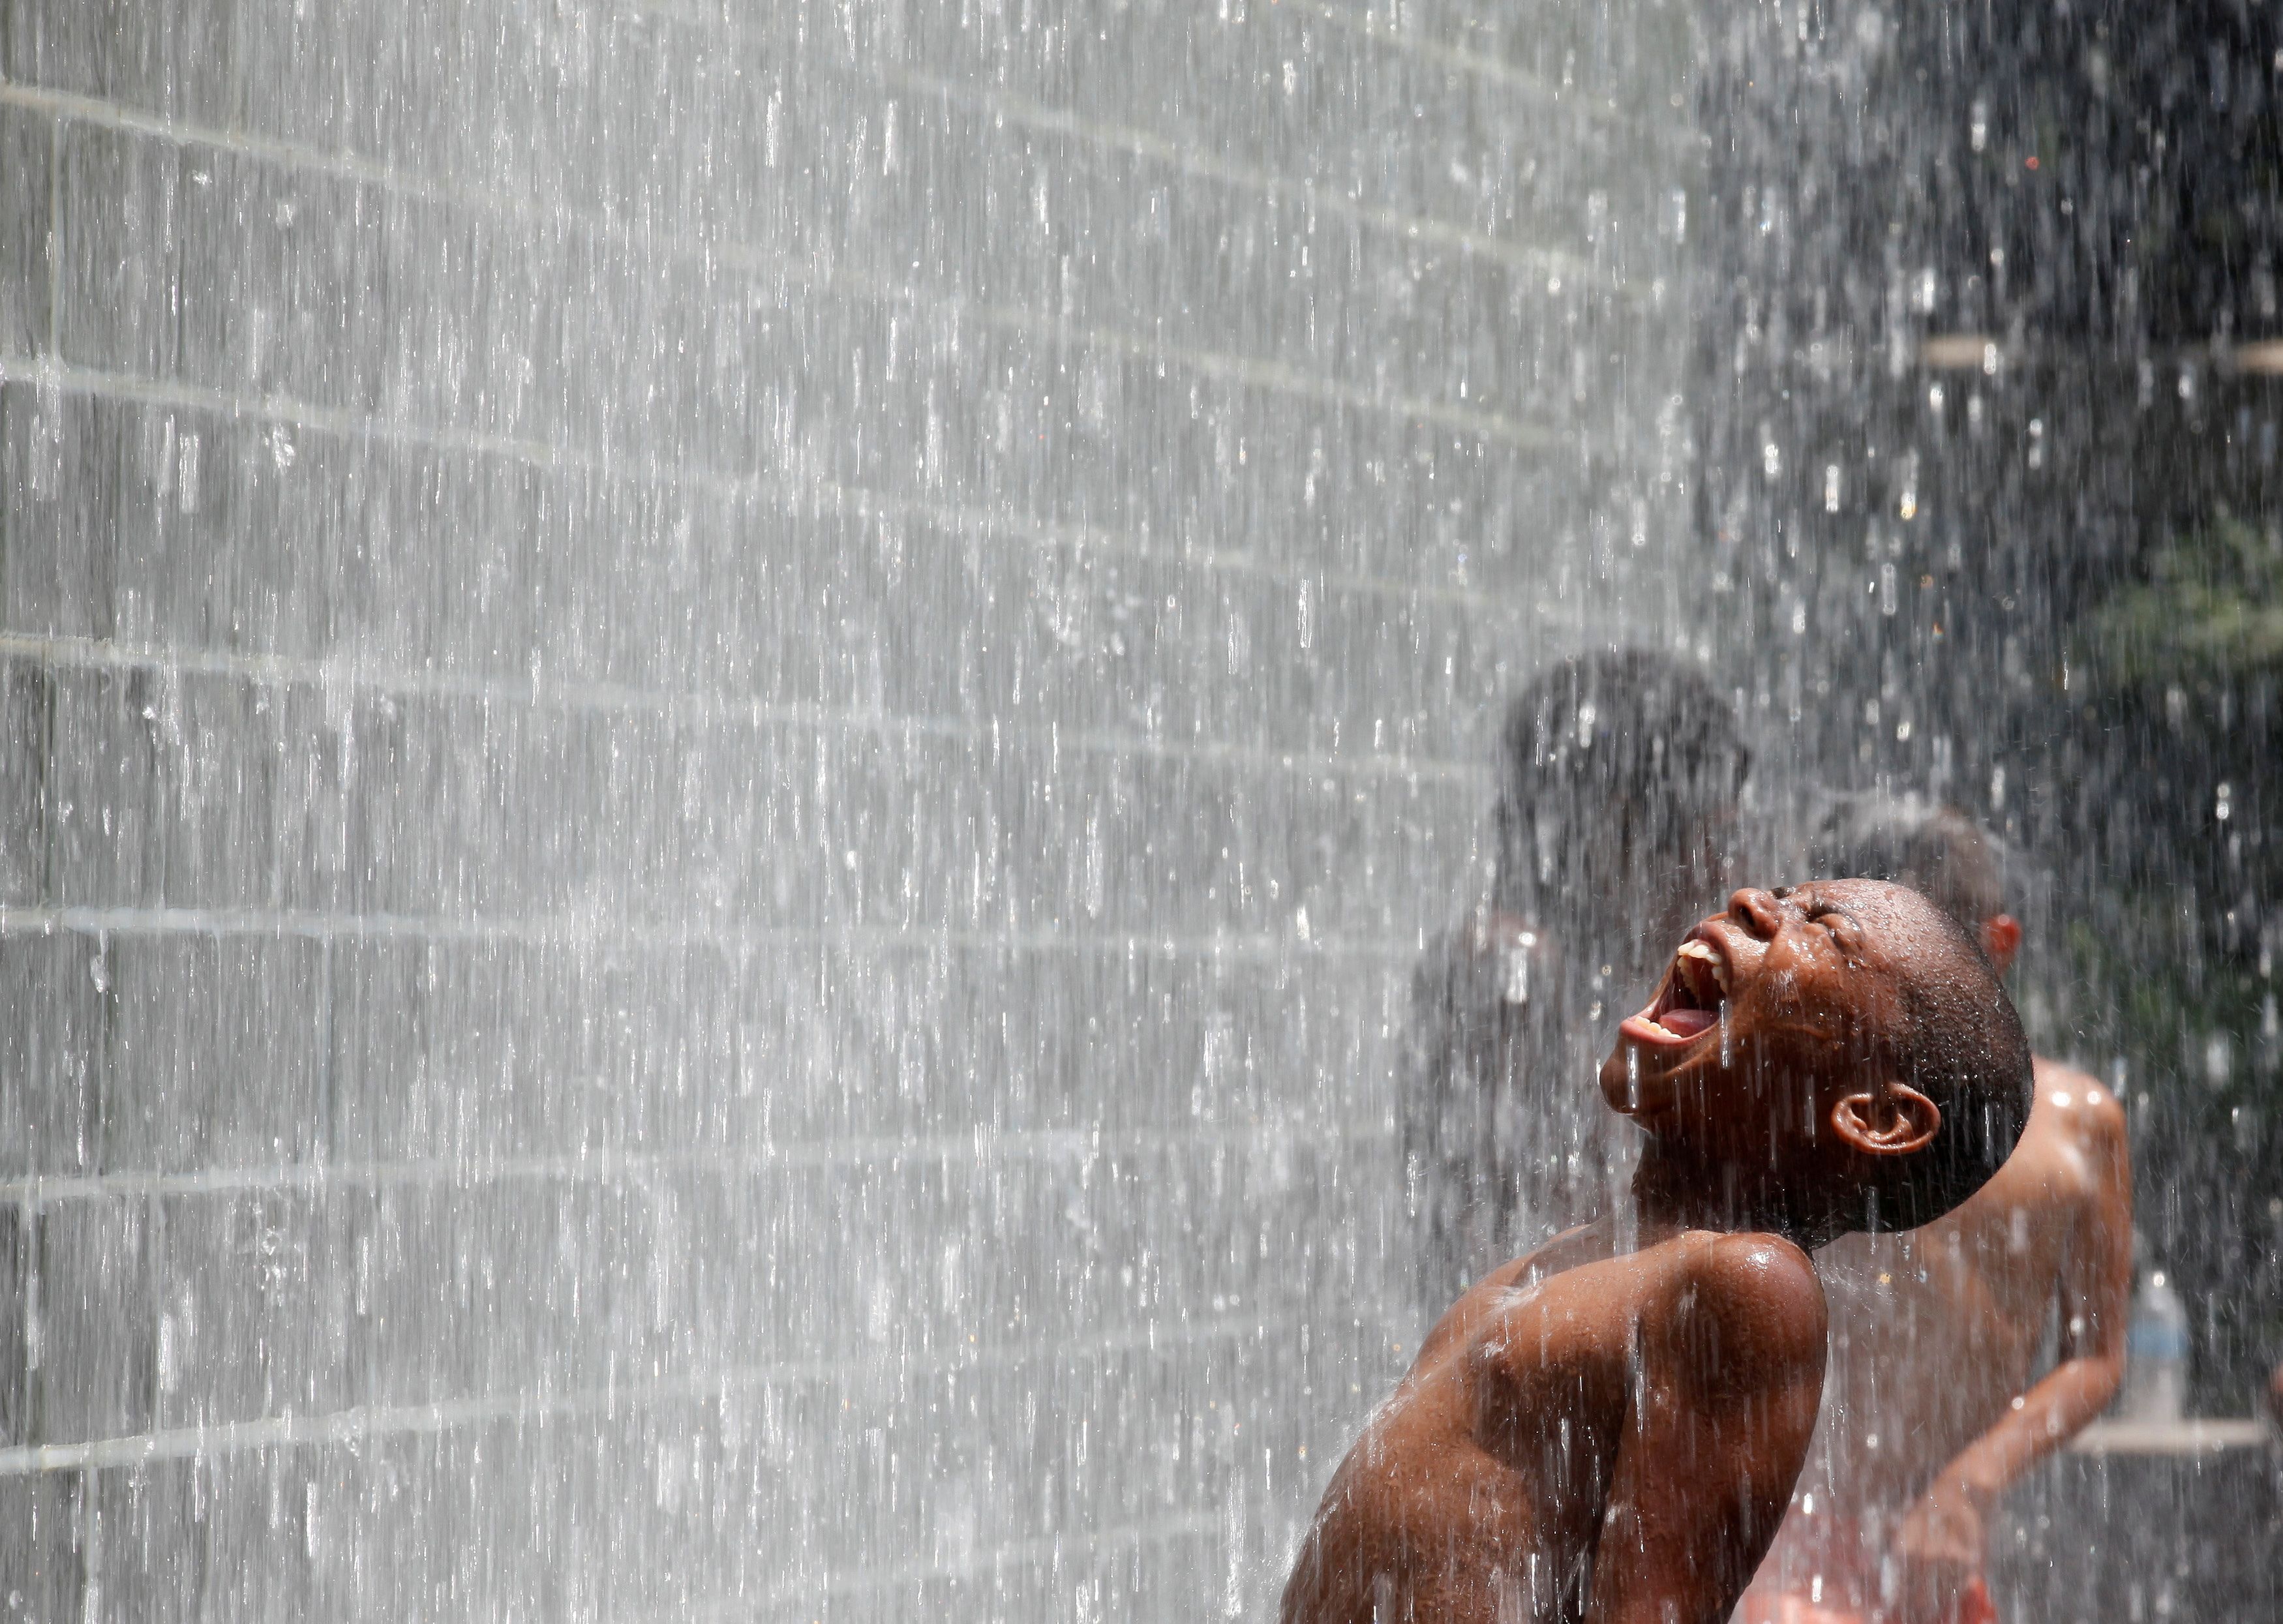 A boy cools off at the Crown Fountain at Millennium Park in Chicago